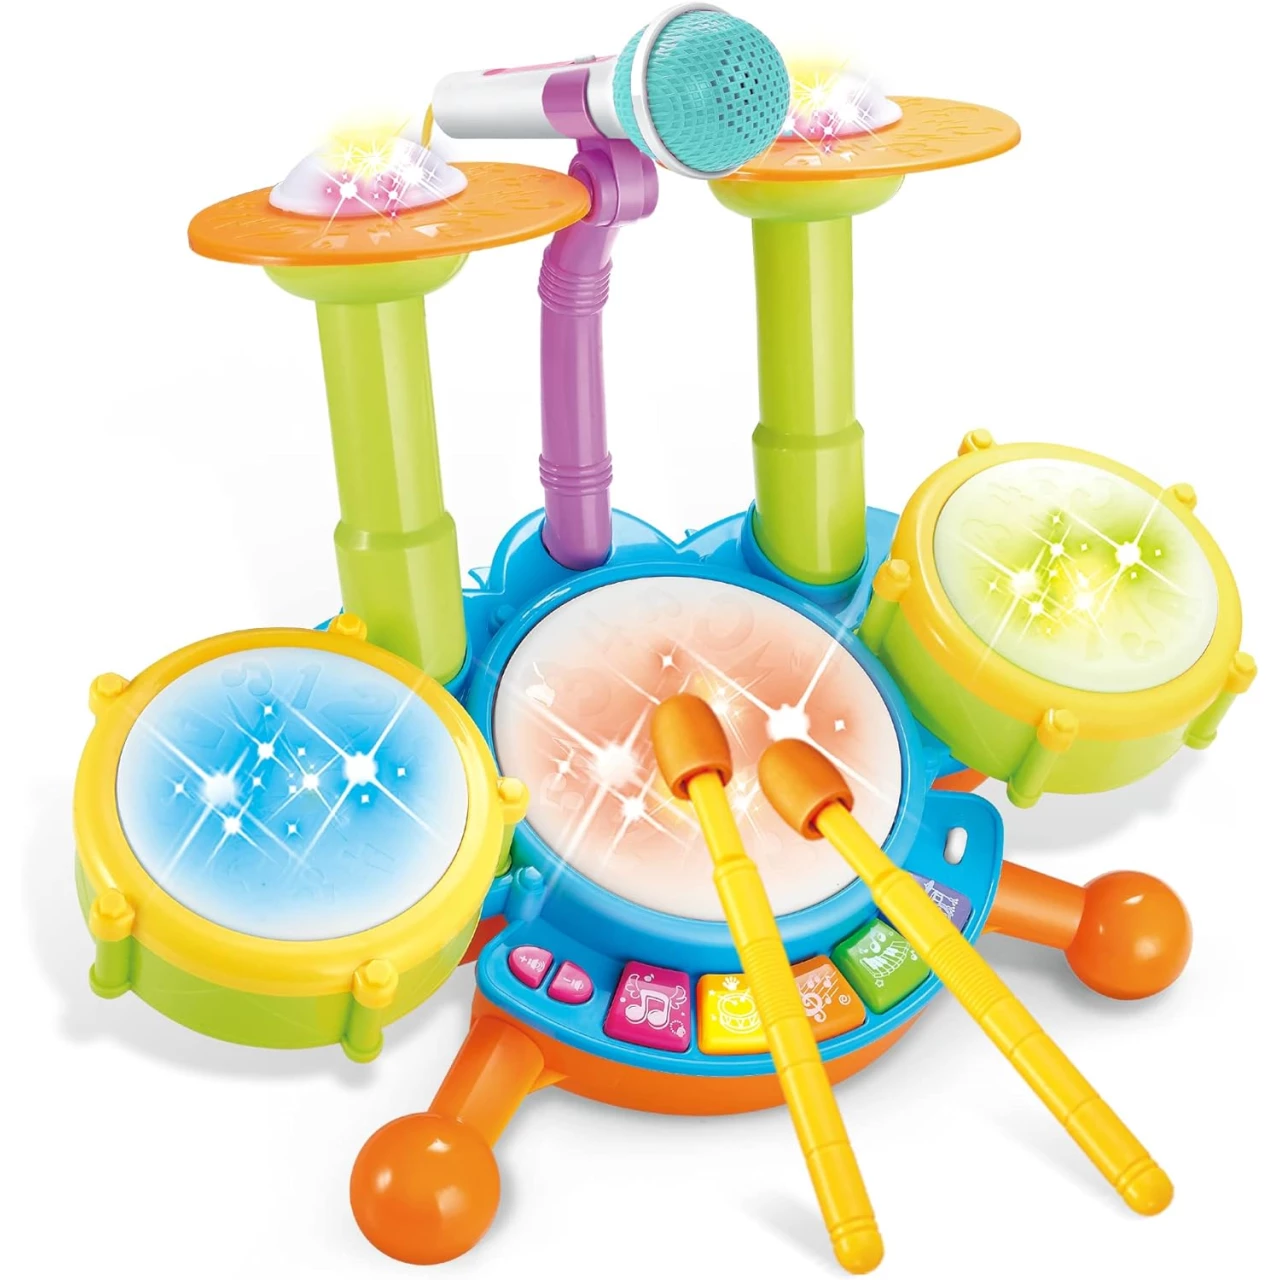 Cozybuy Kids Drum Set for Toddlers 1-3, Baby Drum Set Musical Toddlers Drum Toys with 2 Drum Sticks, Beats Flash Light and Microphone Baby Drums 1 Year Old, Birthday Gift for 1-6 Years Old Boys Girls